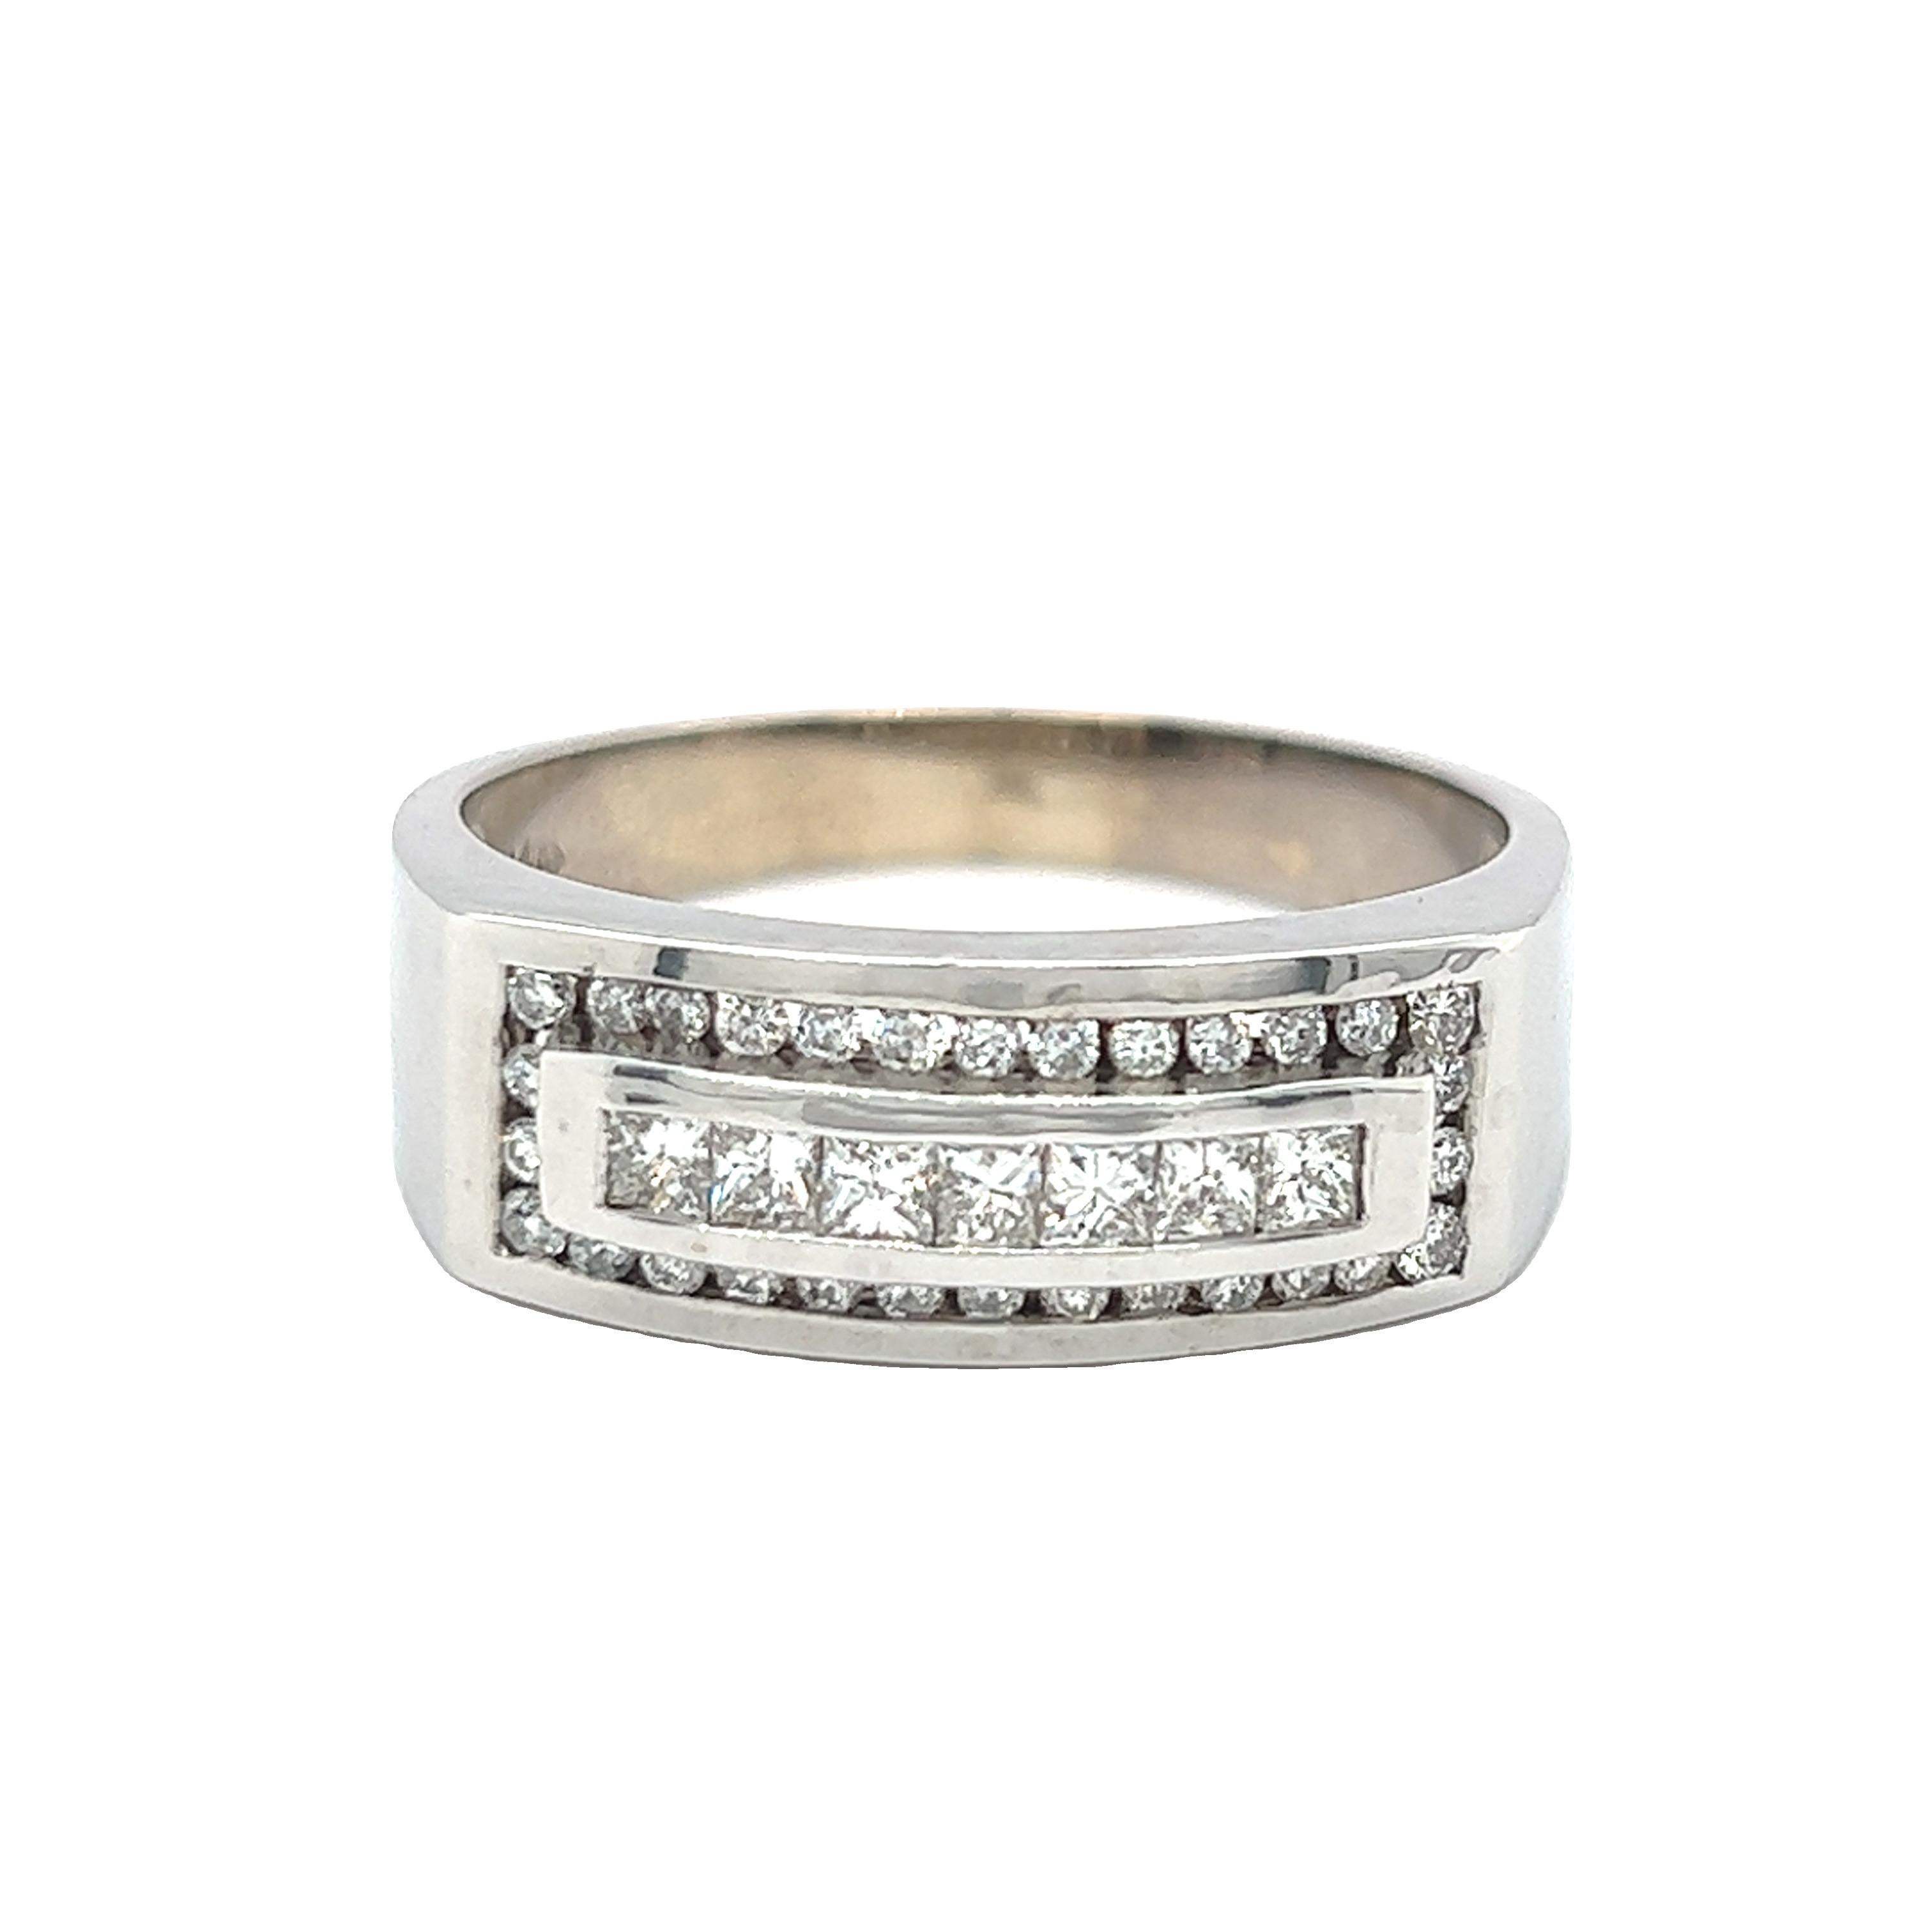 Modern designed men's ring features a straight row princess cut framed with round diamonds. The straight line of its design keeps the ring simple and masculine. The total weight of diamond is approximately 0.90 carat. Crafted in 14k White Gold. The